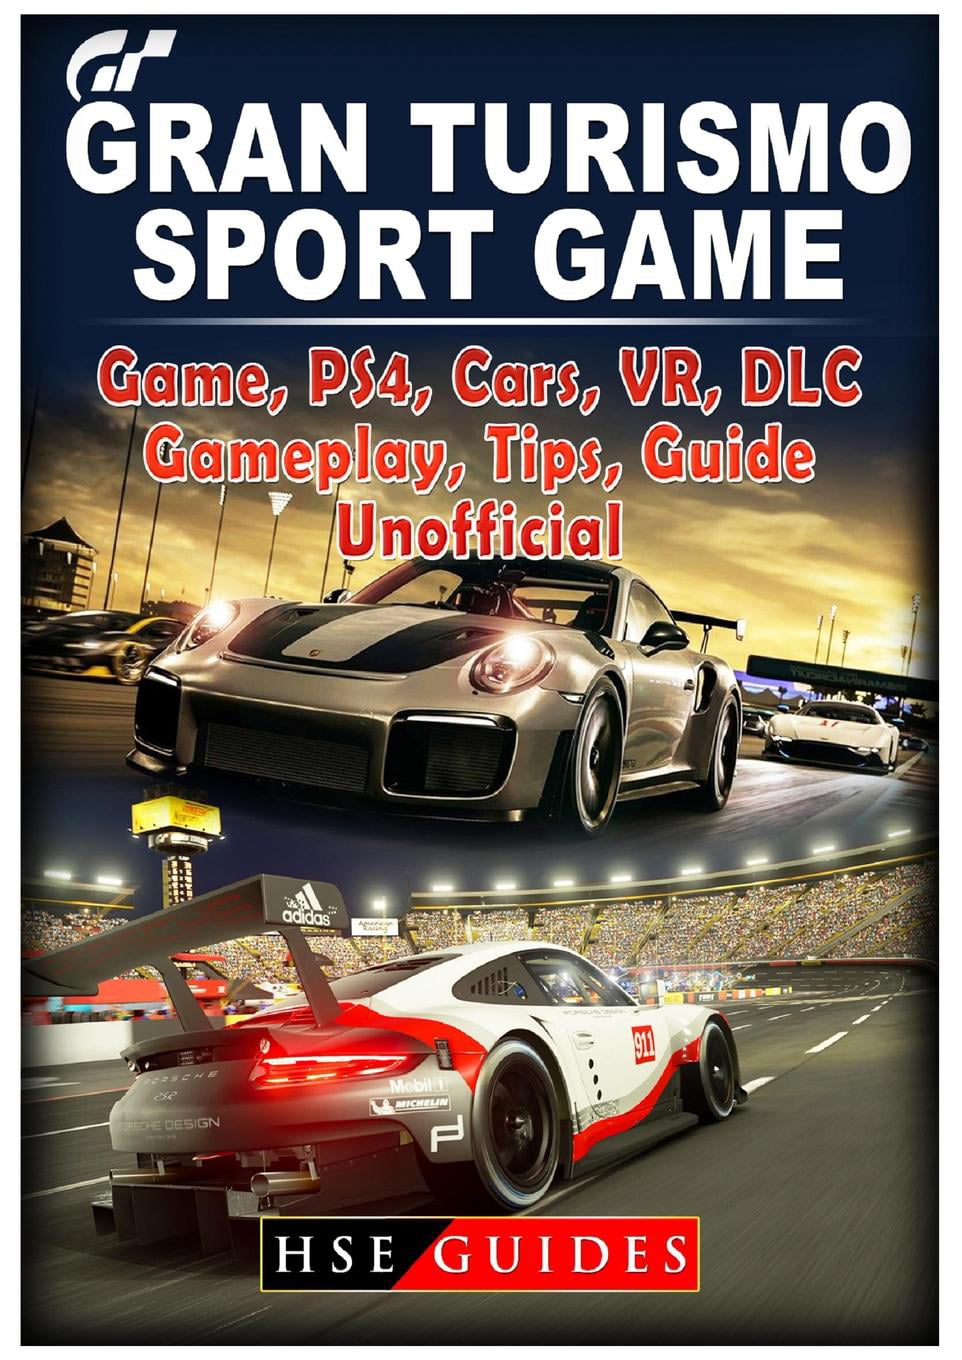 Gran Turismo Sport Game, Cars, VR, DLC, Gameplay, Tips, Guide Unofficial (Paperback) - Walmart.com